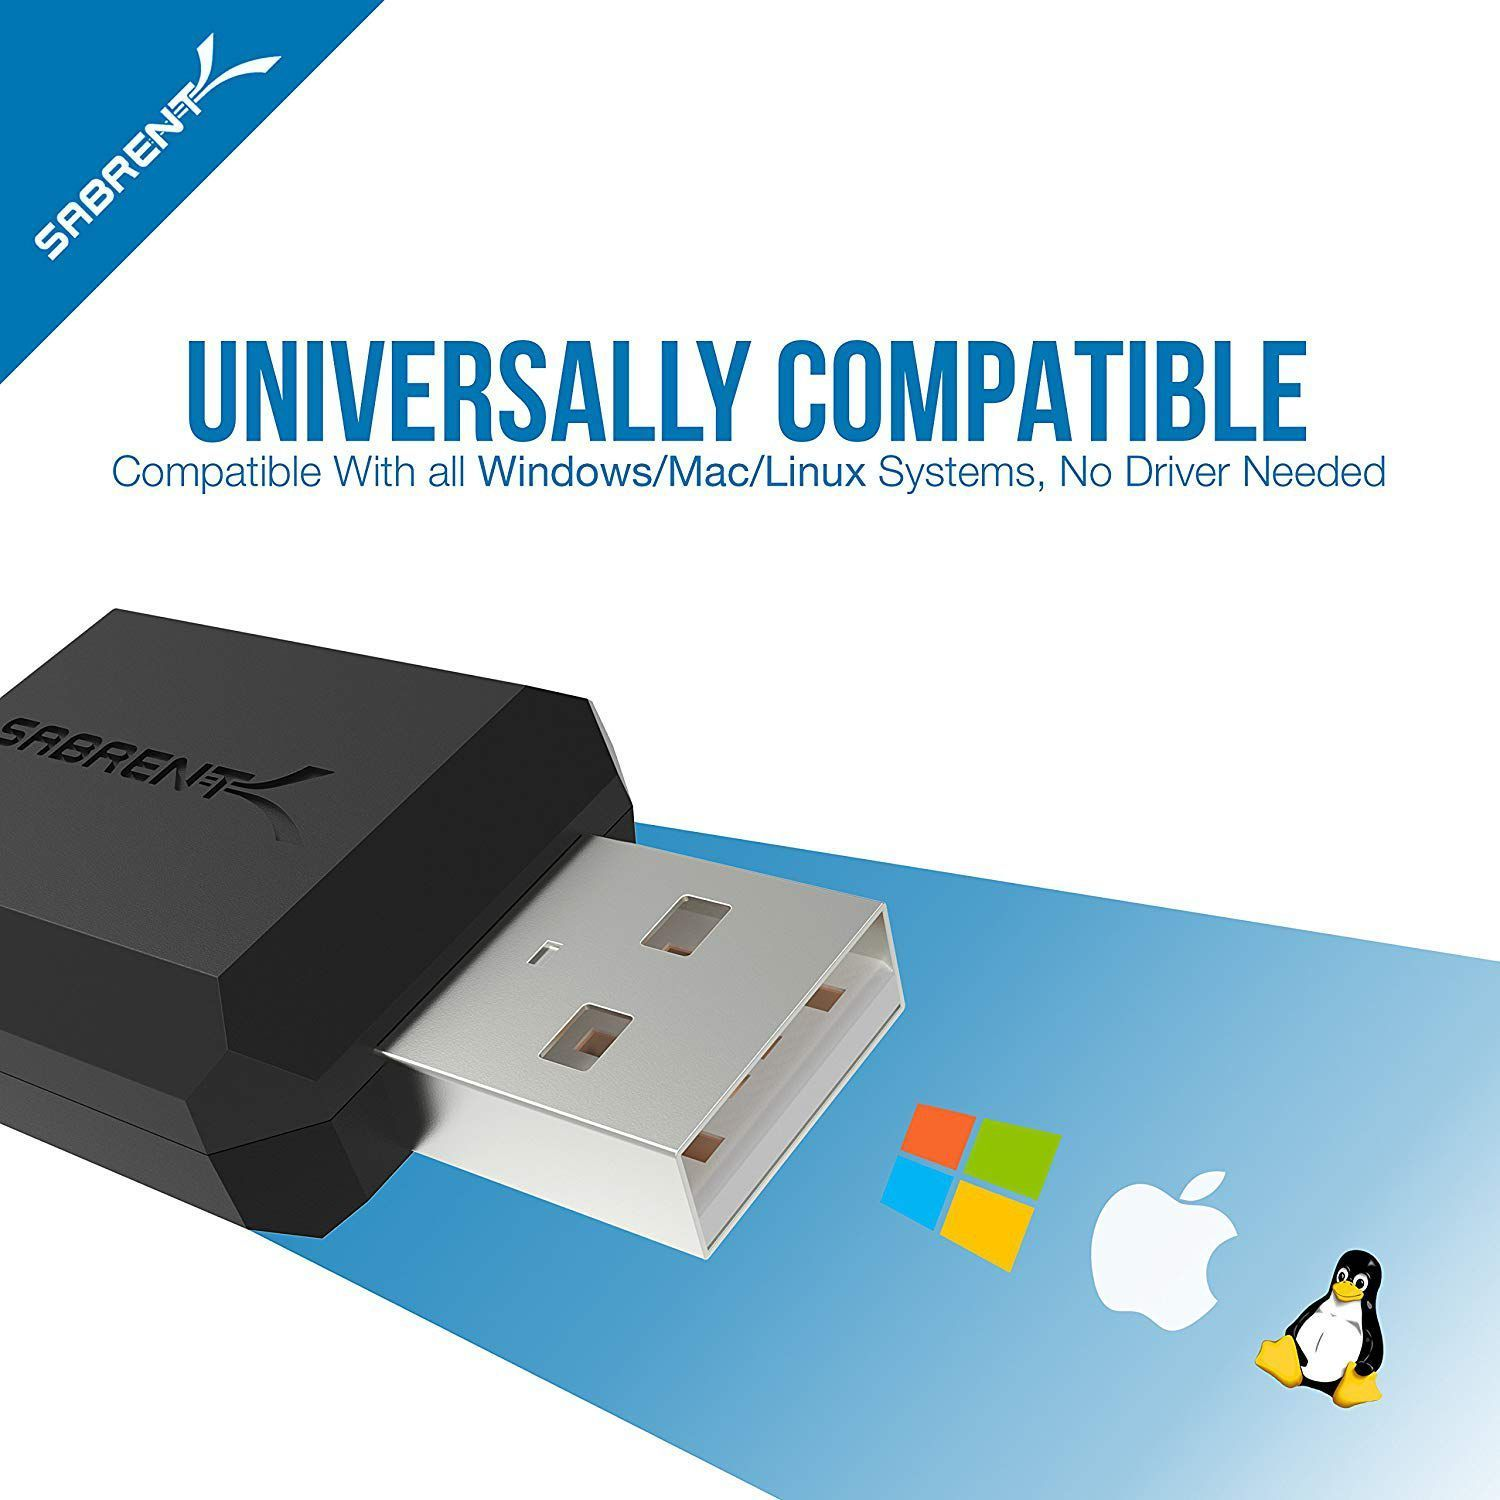 SABRENT USB External Stereo Sound Adapter for Windows and Mac. Plug and Play No Drivers Needed. (AU-MMSA)